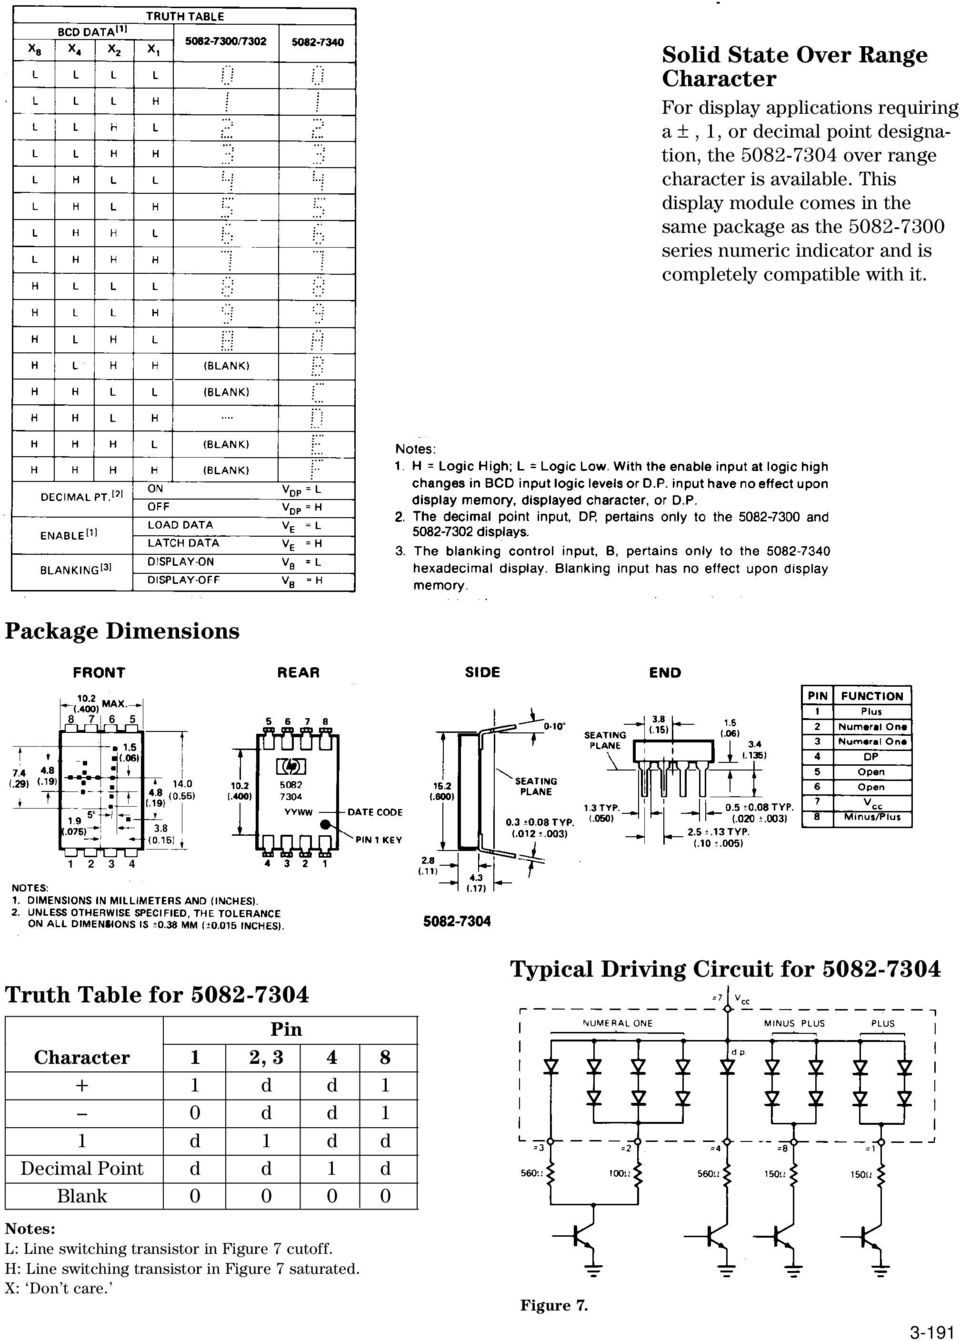 Package Dimensions 8 7 6 5 1 2 3 4 Truth Table for 5082-7304 Pin Character 1 2, 3 4 8 + 1 d d 1 0 d d 1 1 d 1 d d Decimal Point d d 1 d Blank 0 0 0 0